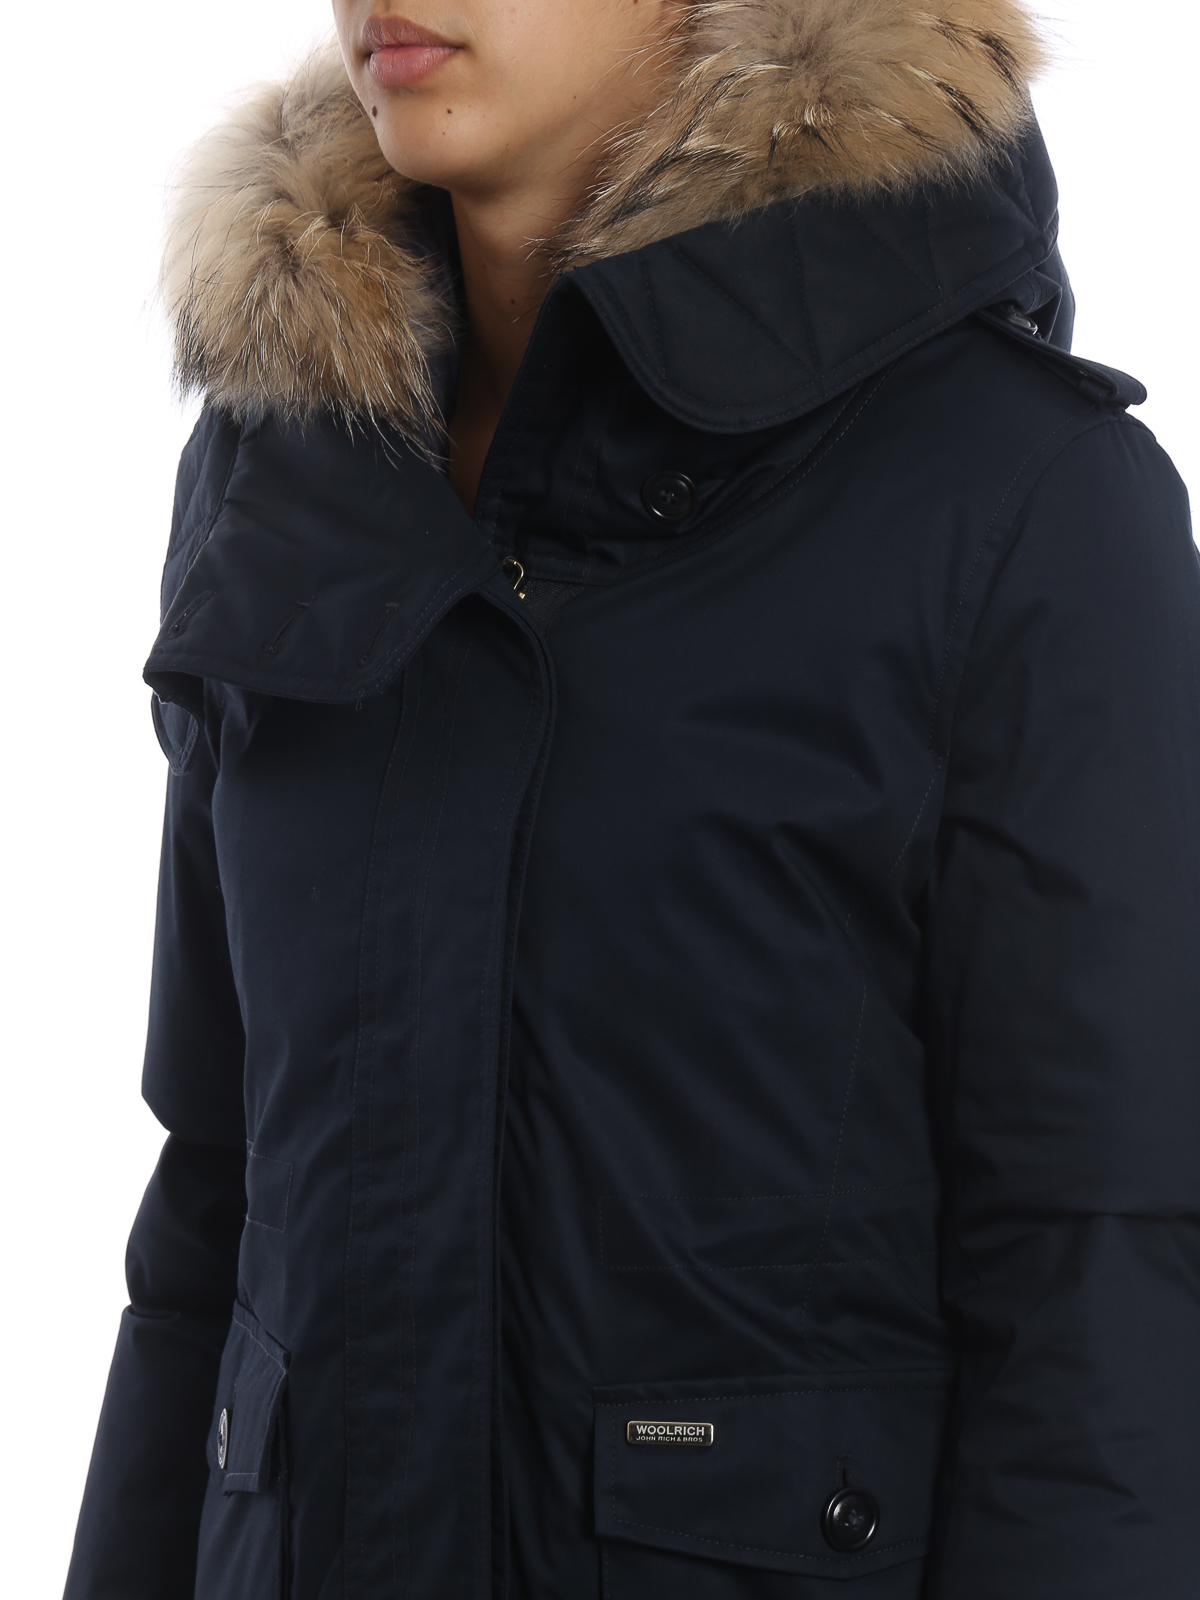 Resistent Automatisch Verbinding Padded coats Woolrich - Scarlett Parka two in one dark blue coat -  WWCPS2685LM10300